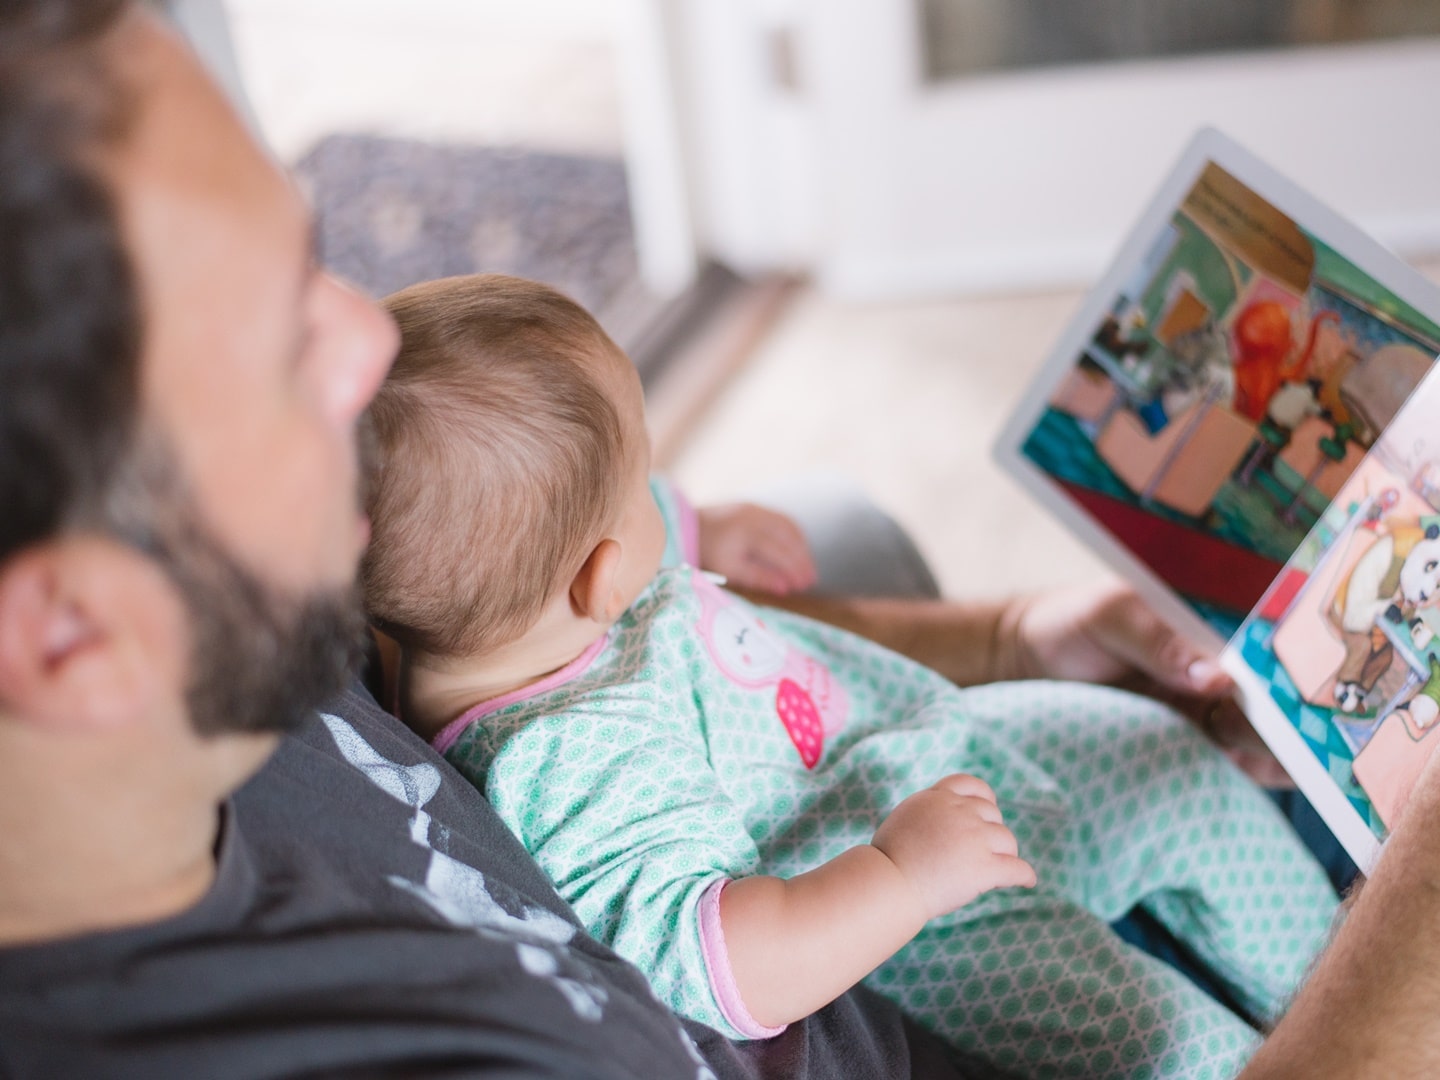 dad reading a story to a baby sitting in his lap